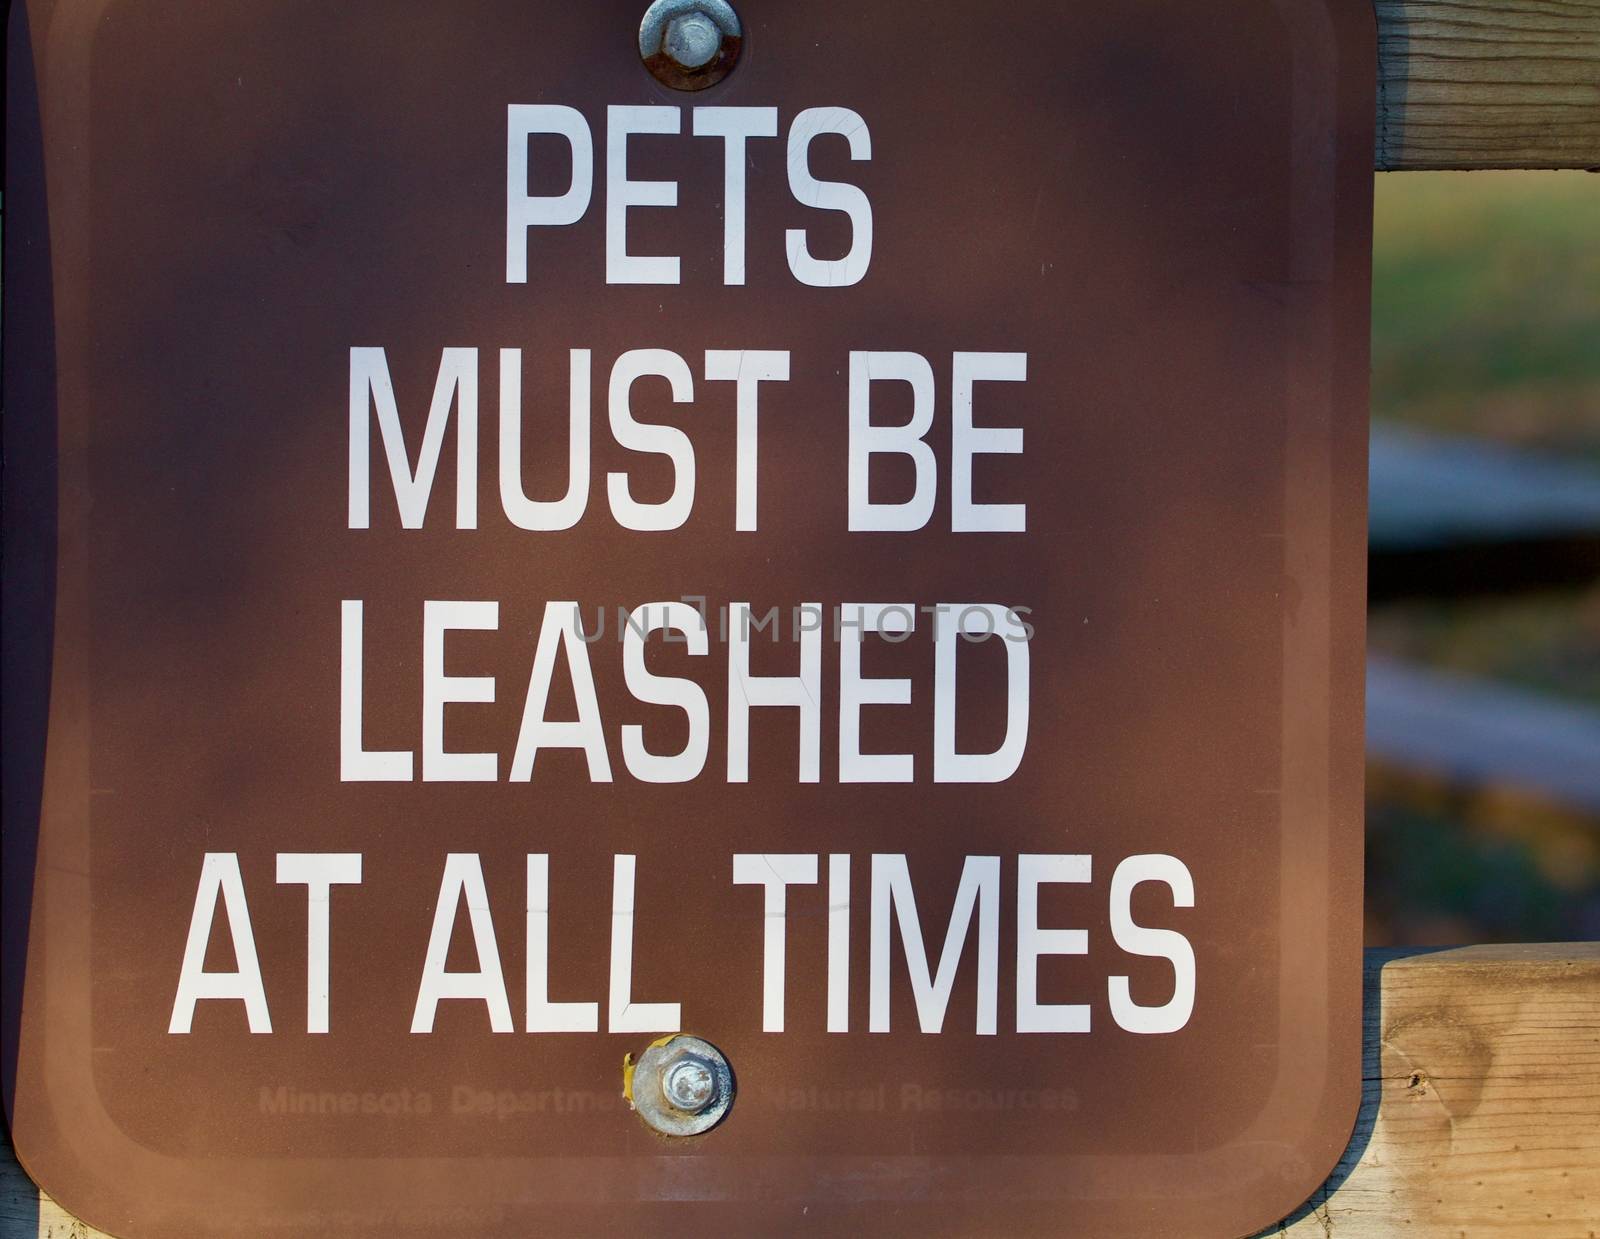 White lettering on brown shows pets must be leased at all times.